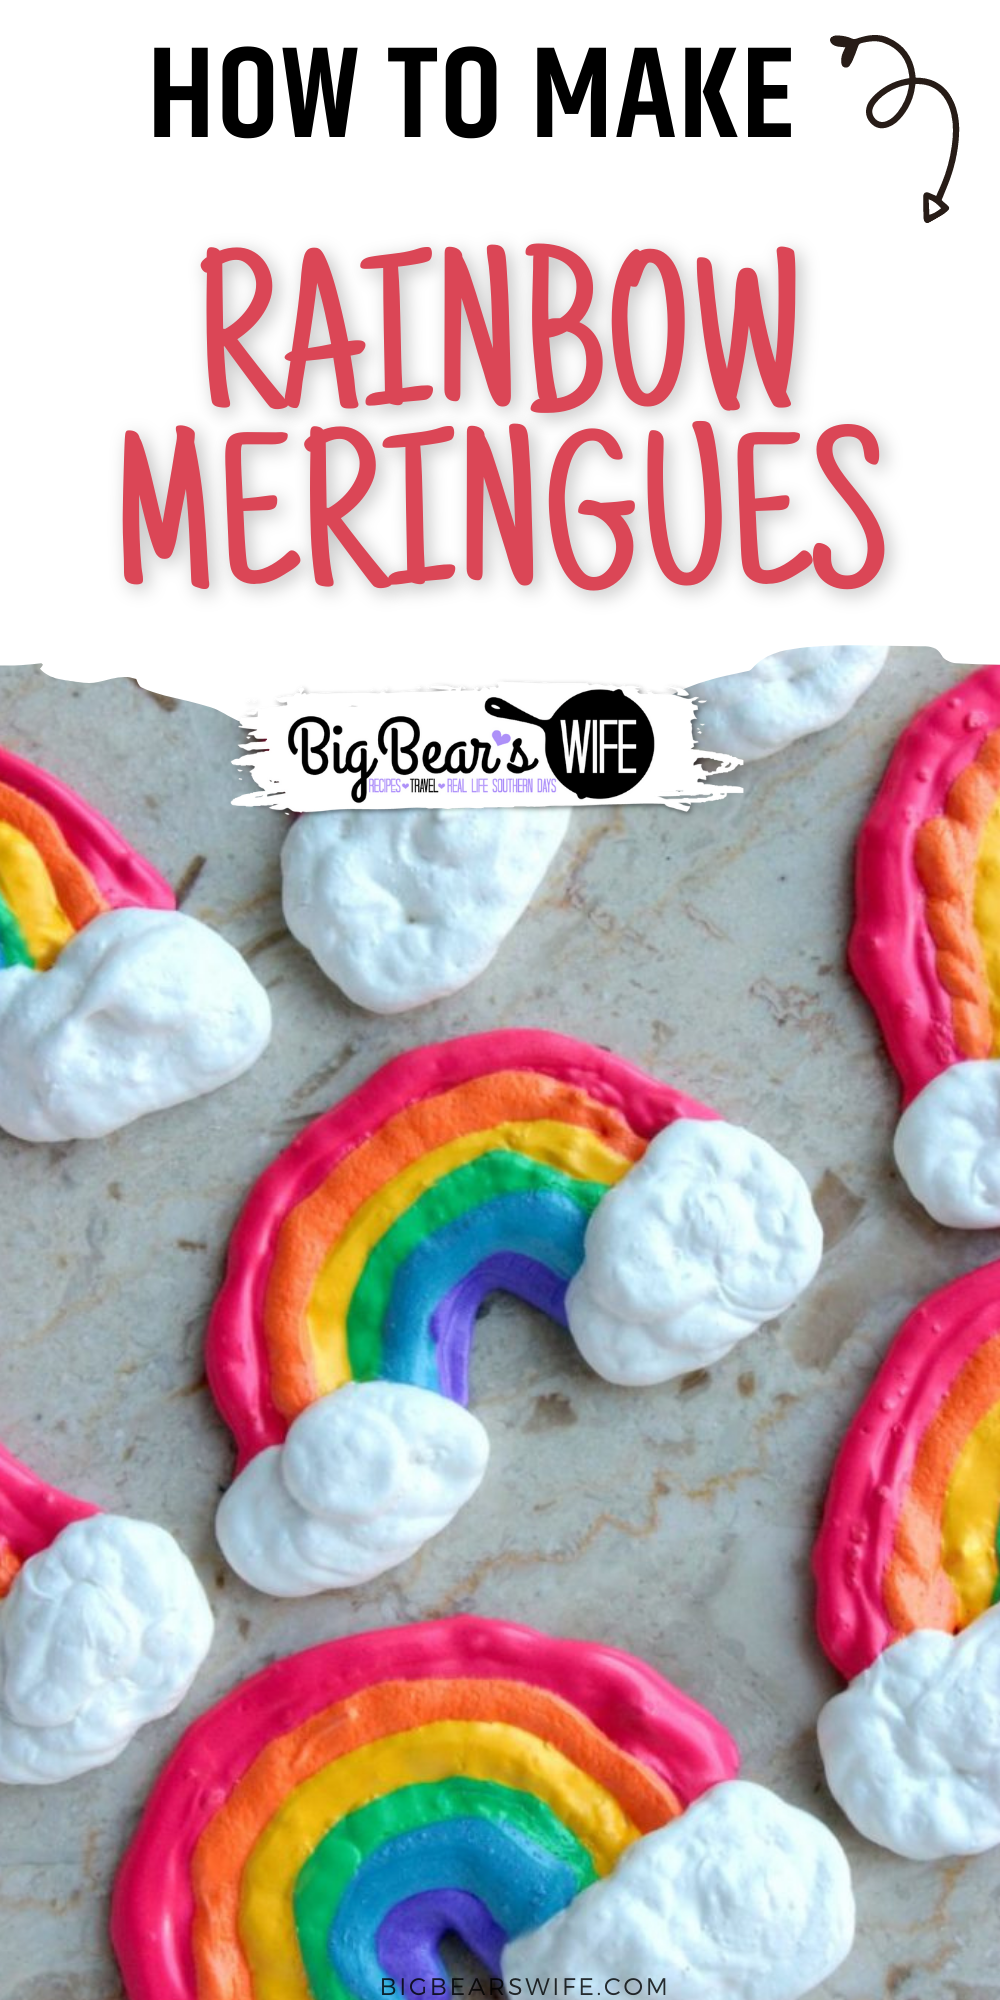 These Rainbow Meringues are light airy, crispy rainbow shaped cookies that are perfect for this weekend's St. Patrick's Day celebrations! via @bigbearswife